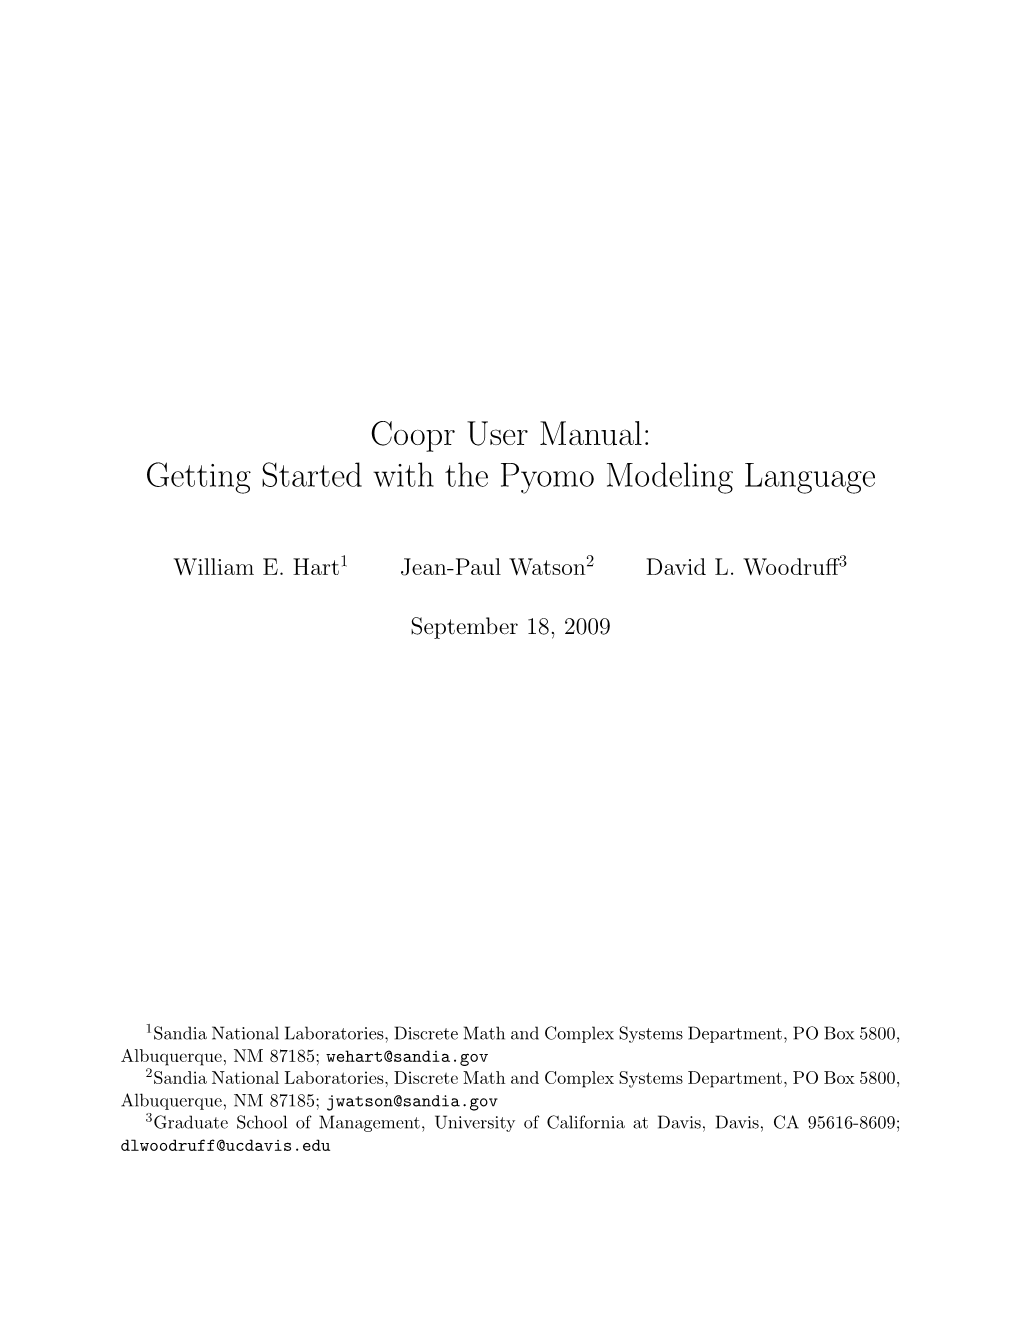 Coopr User Manual: Getting Started with the Pyomo Modeling Language